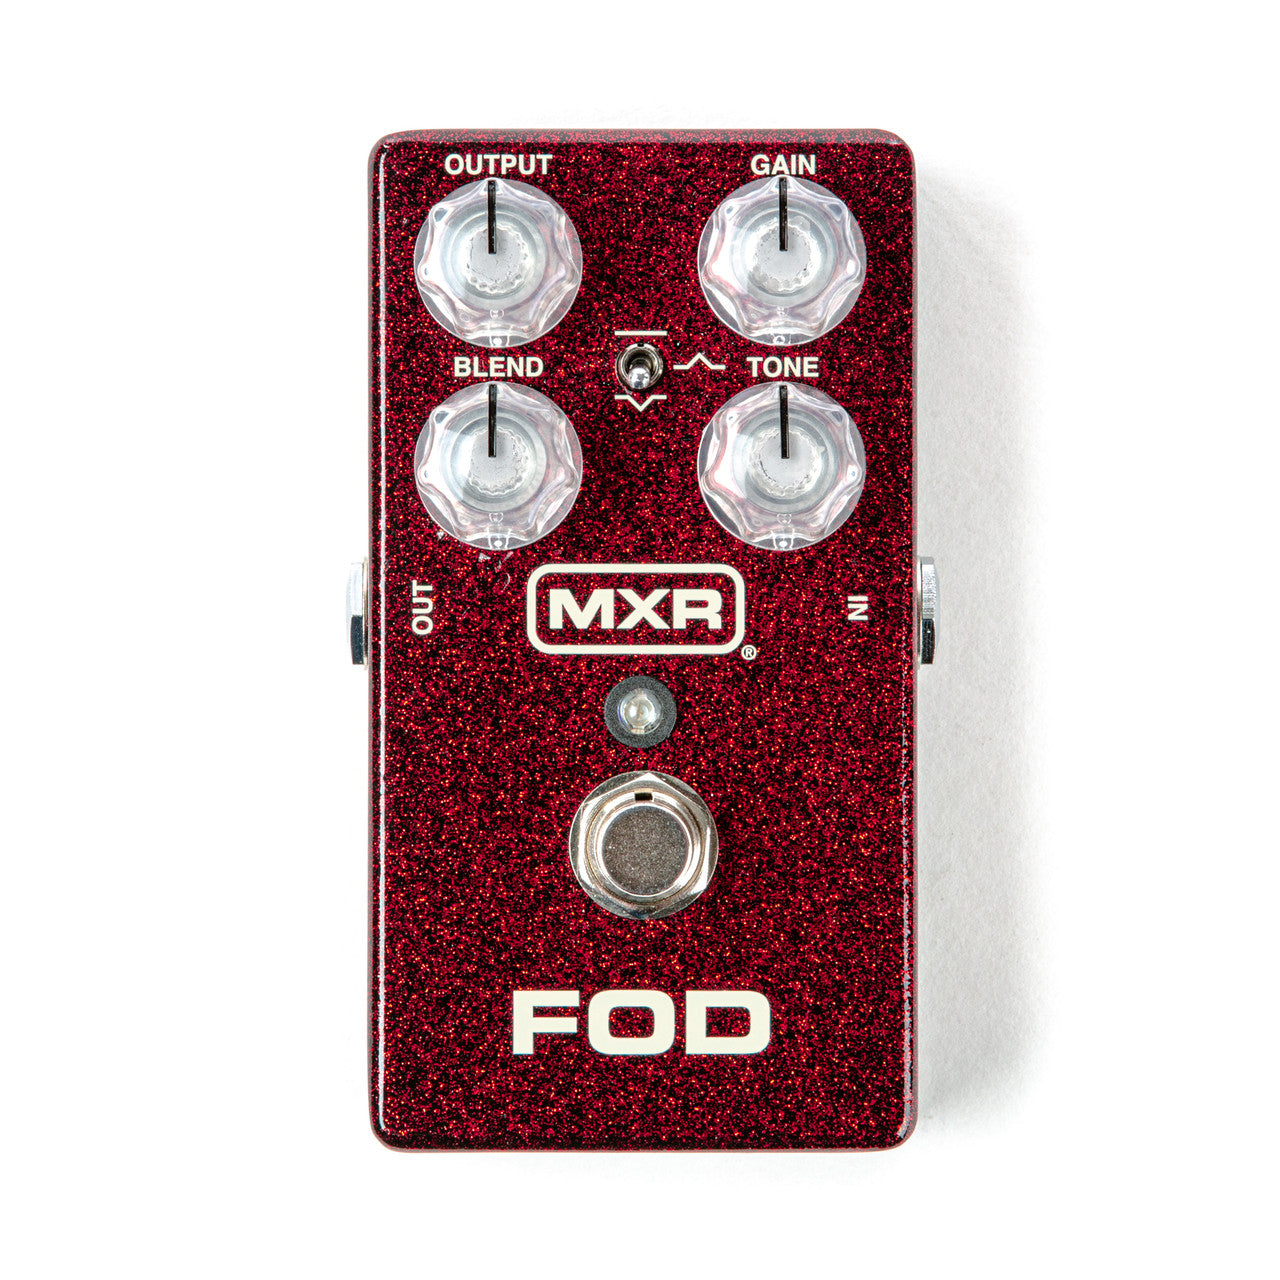 Dunlop MXR M251 FOD Drive Overdrive Guitar Effect Pedal + 2 FREE Warwick Patch Cables